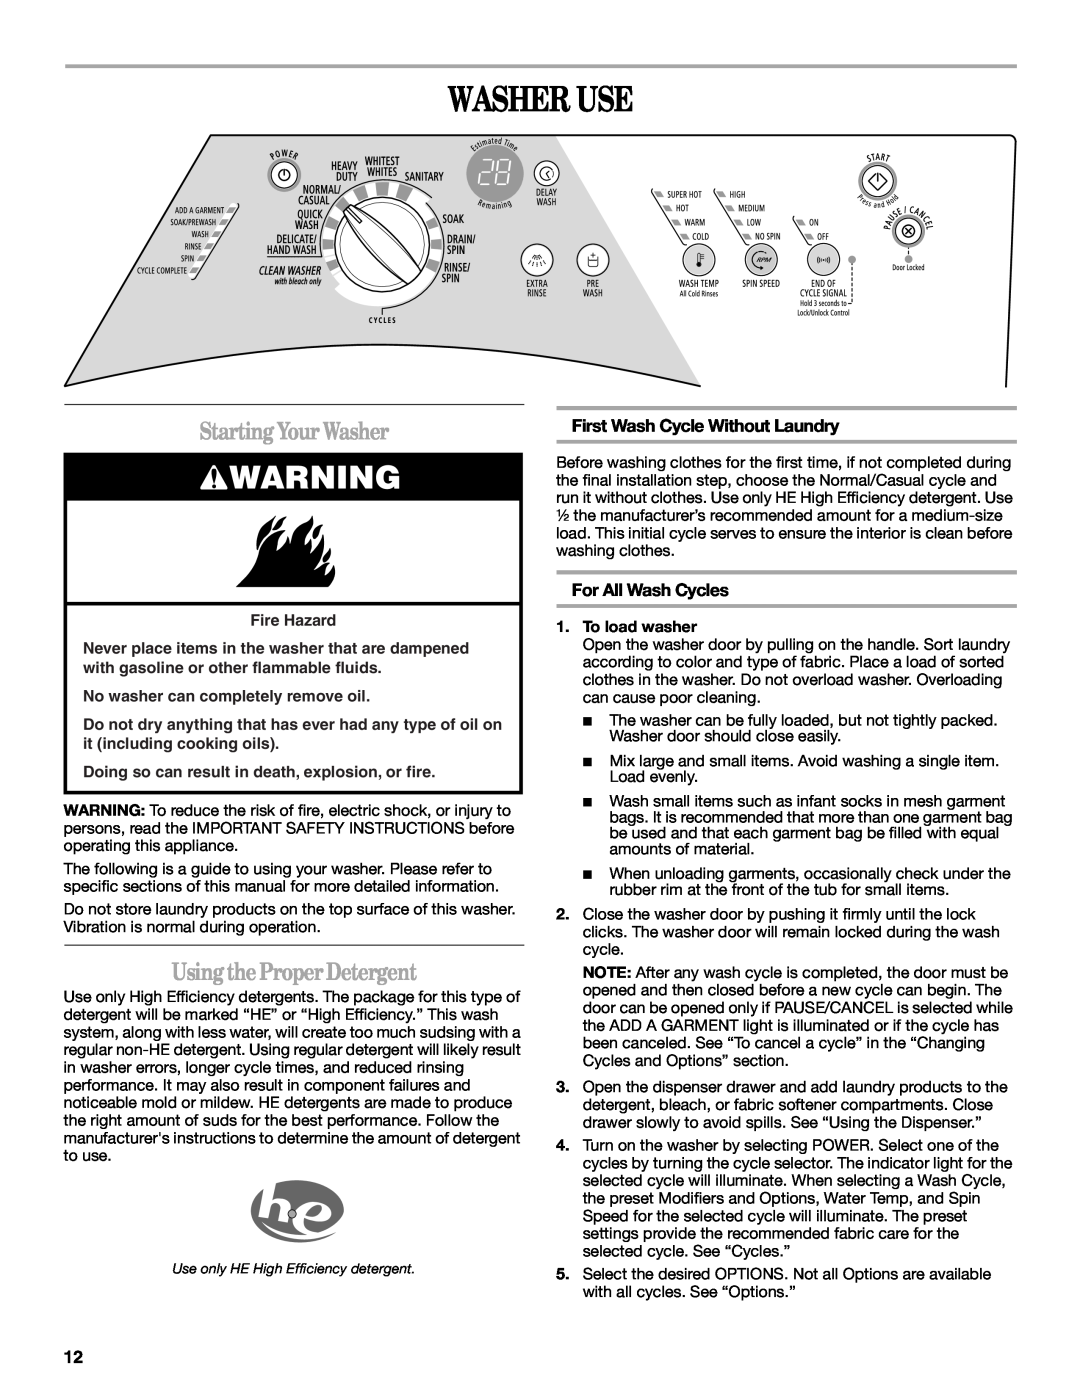 Whirlpool W10117768A manual Washer Use, StartingYourWasher, UsingtheProperDetergent, First Wash Cycle Without Laundry 